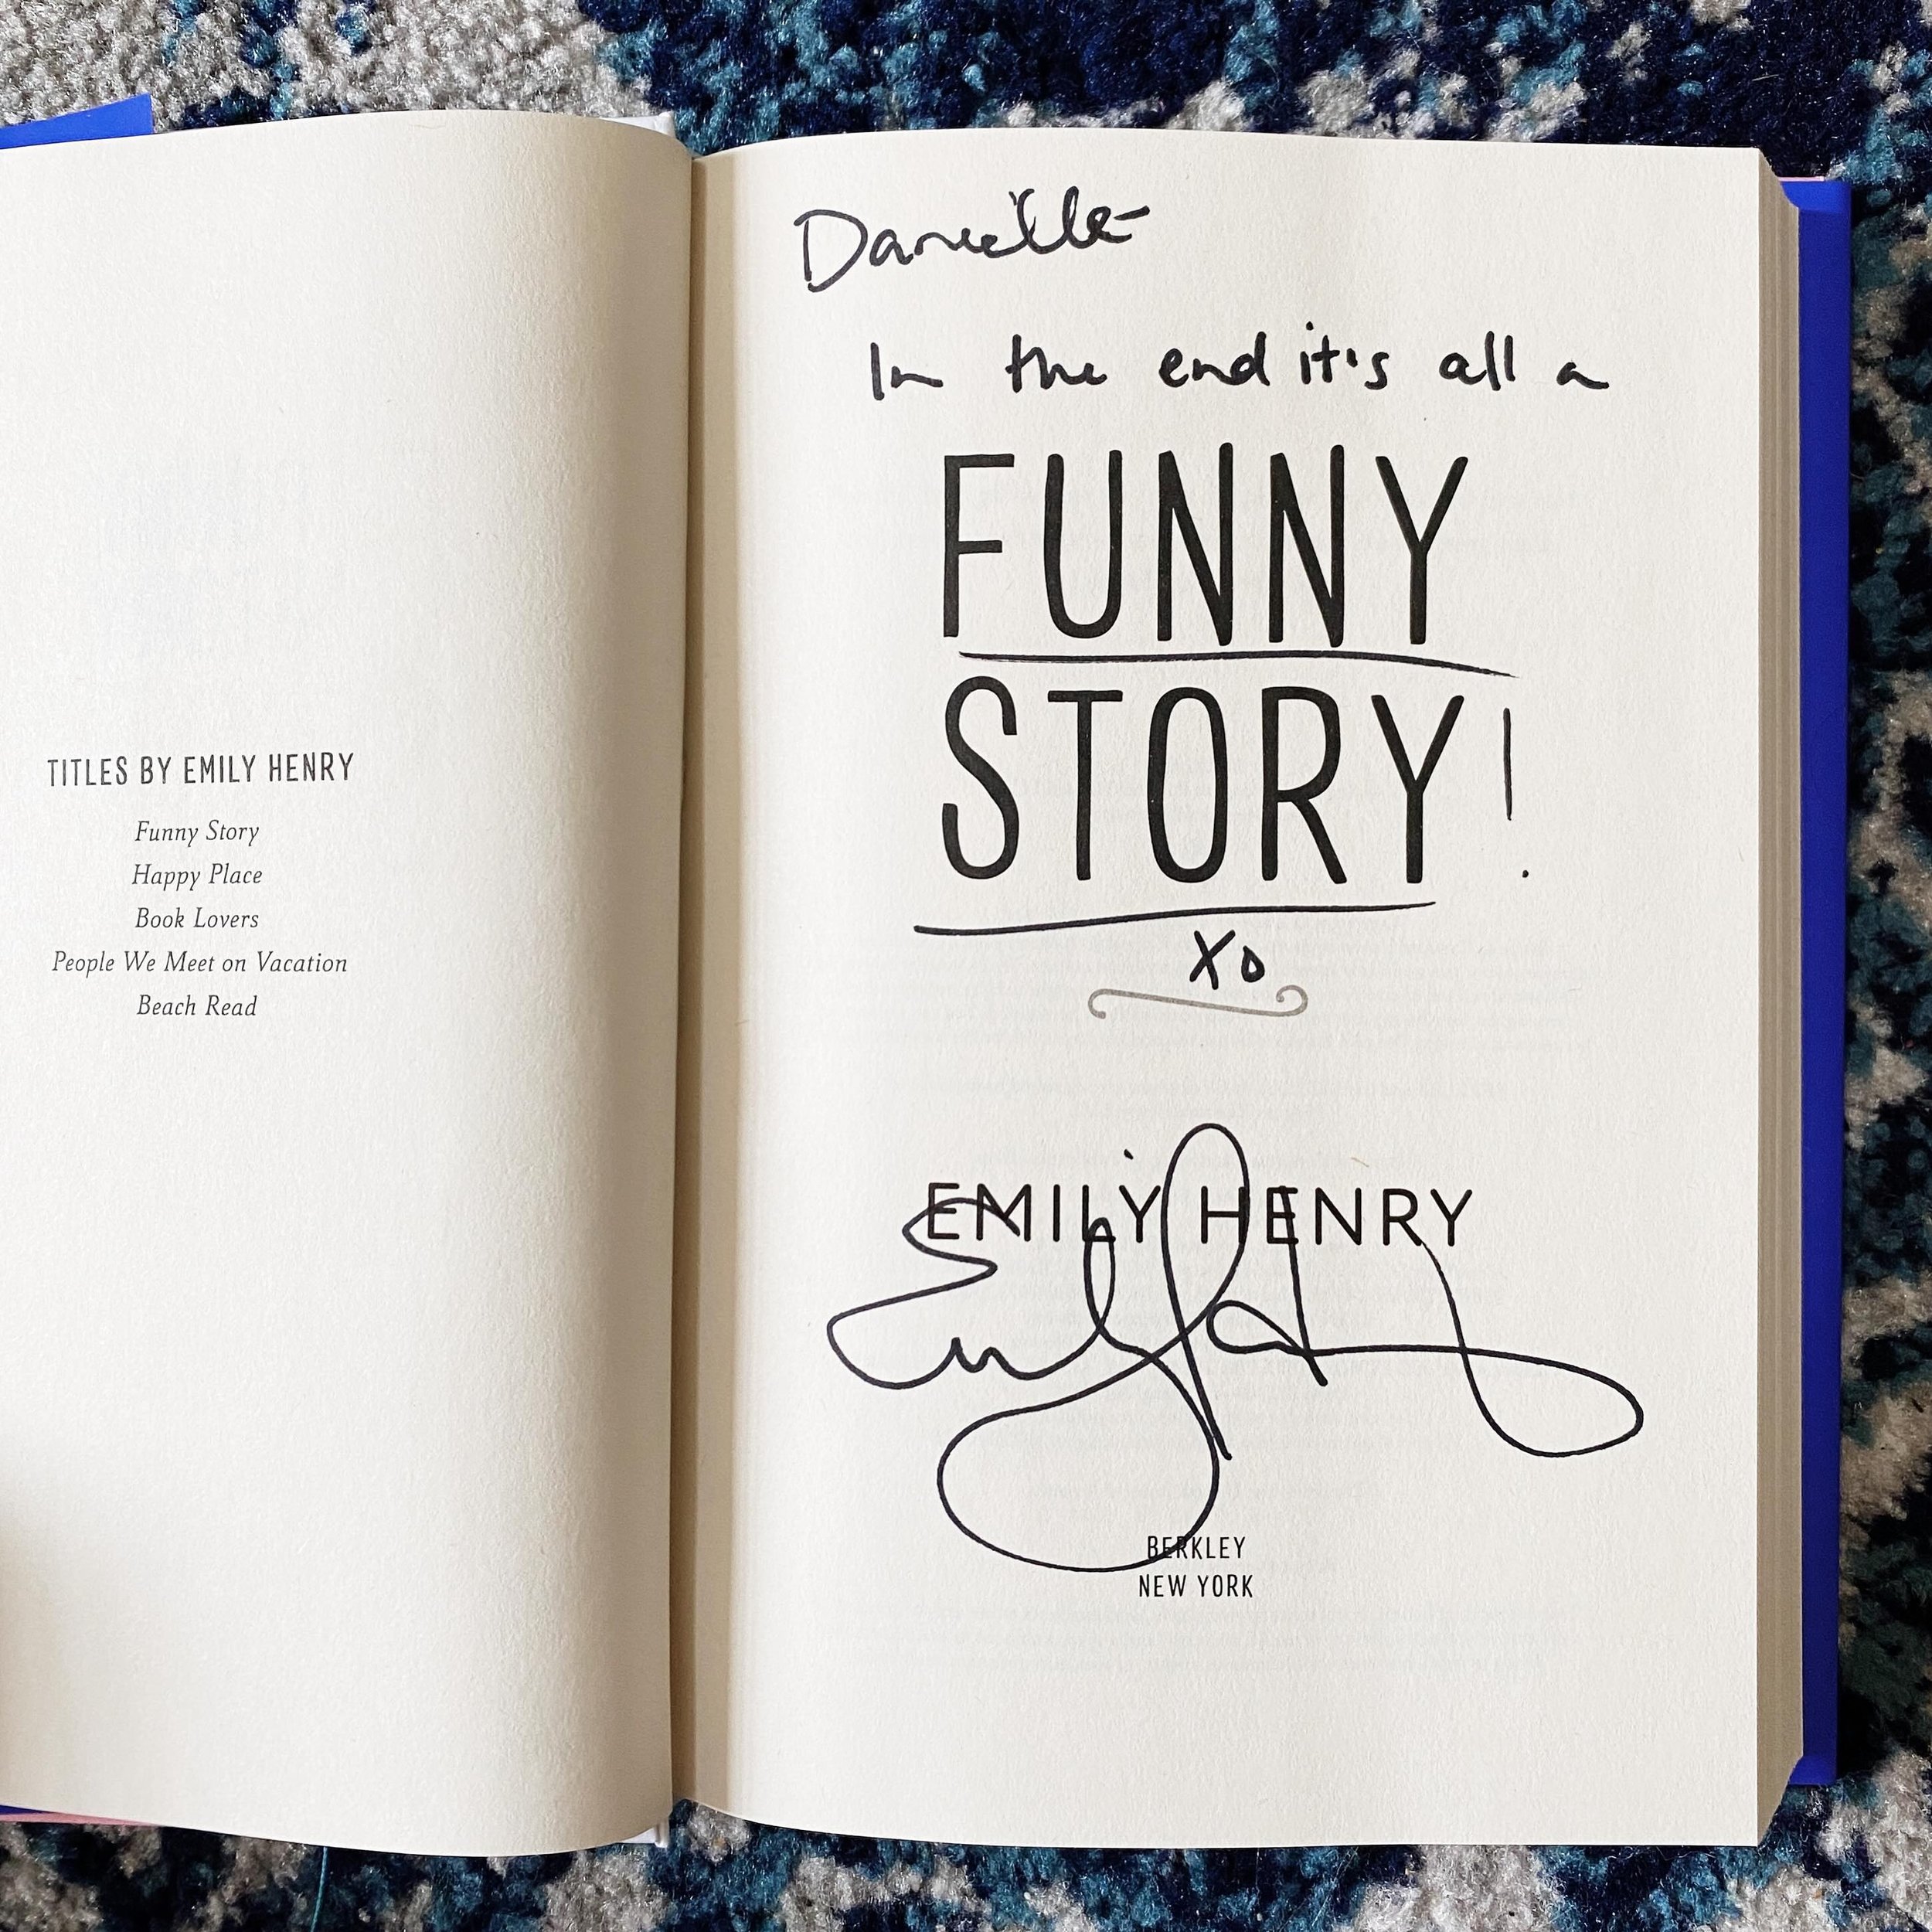 &quot;All those moments throughout the days, weeks, months that don't get marked on calendars with hand-drawn stars or little stickers.
Those are the moments that make a life.&quot; ✨
Emily, thank you for all of your (beautiful, heartbreaking, FUNNY)